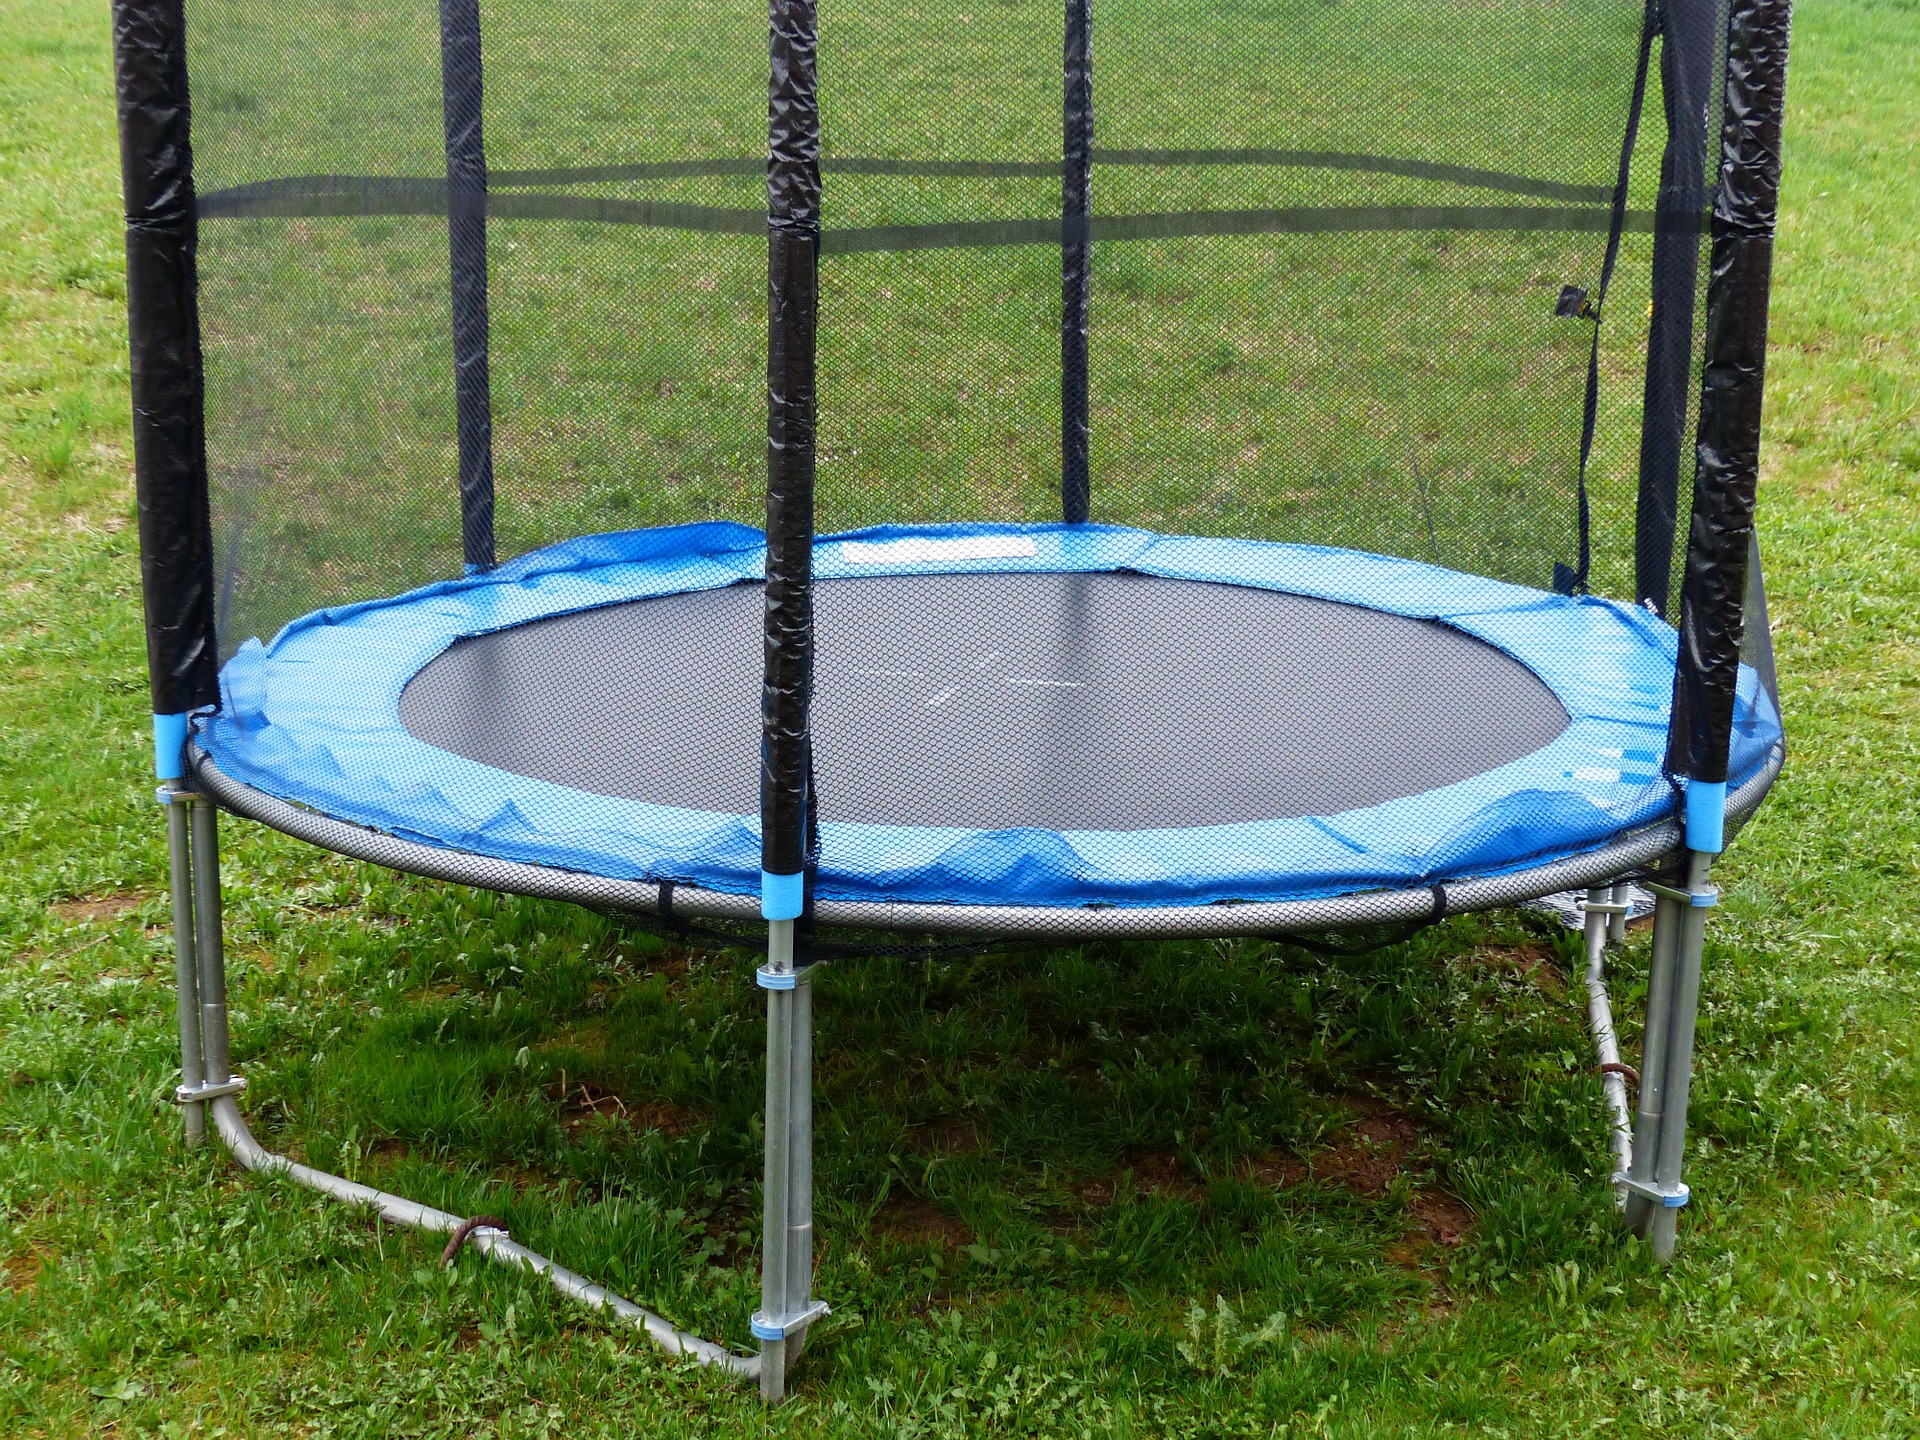 Best Trampoline Reviews 2019 An Ultimate Buyer's Guide